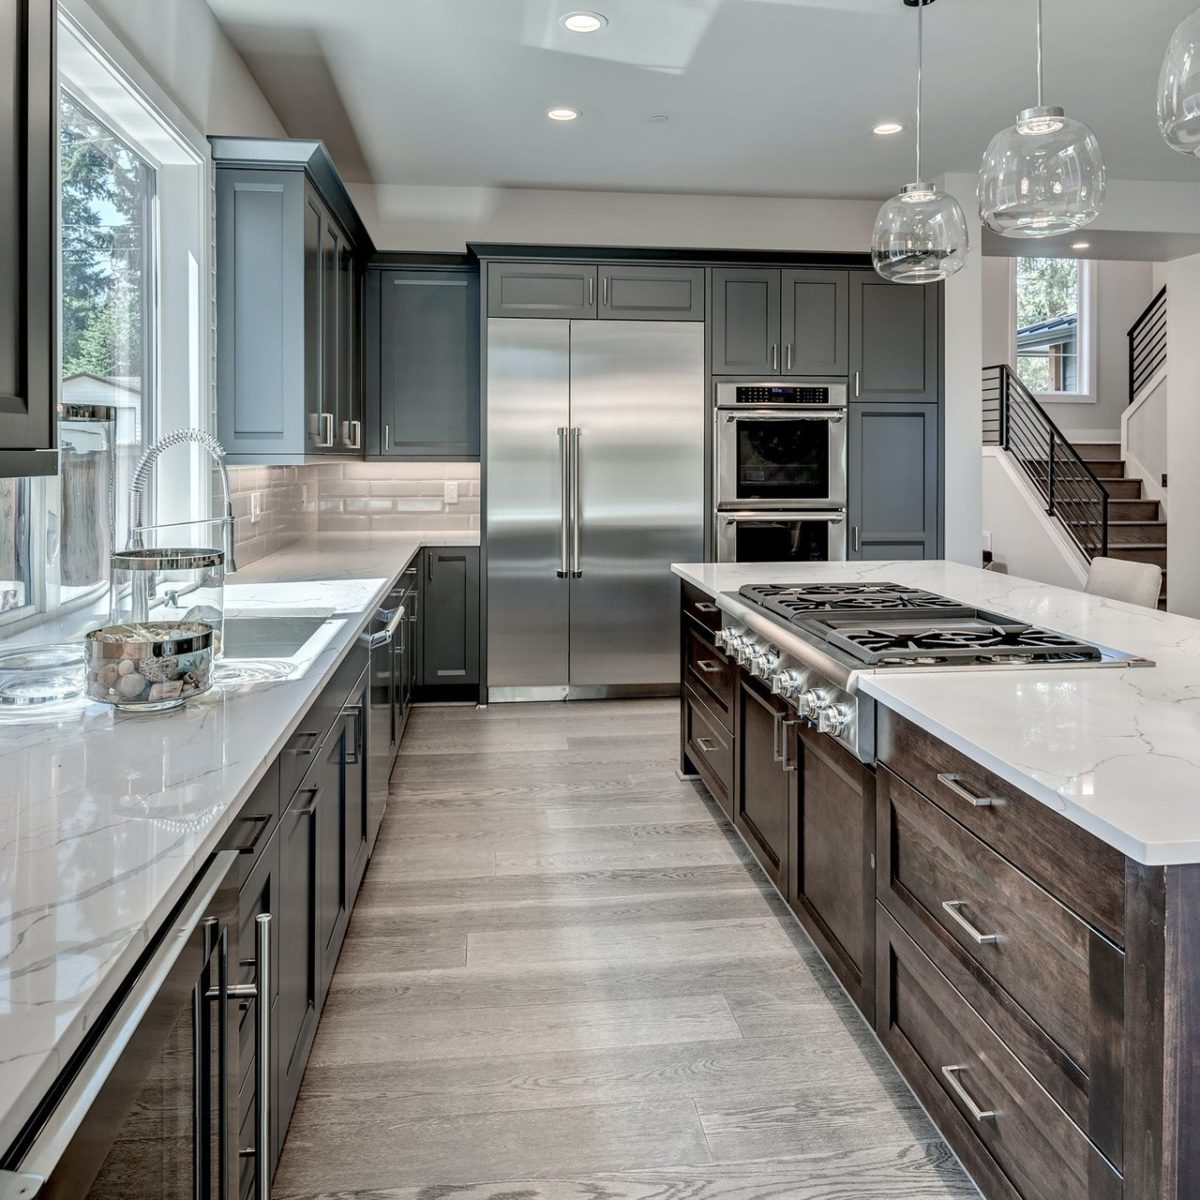 Before and After Kitchen Remodel Projects   What You Can Learn